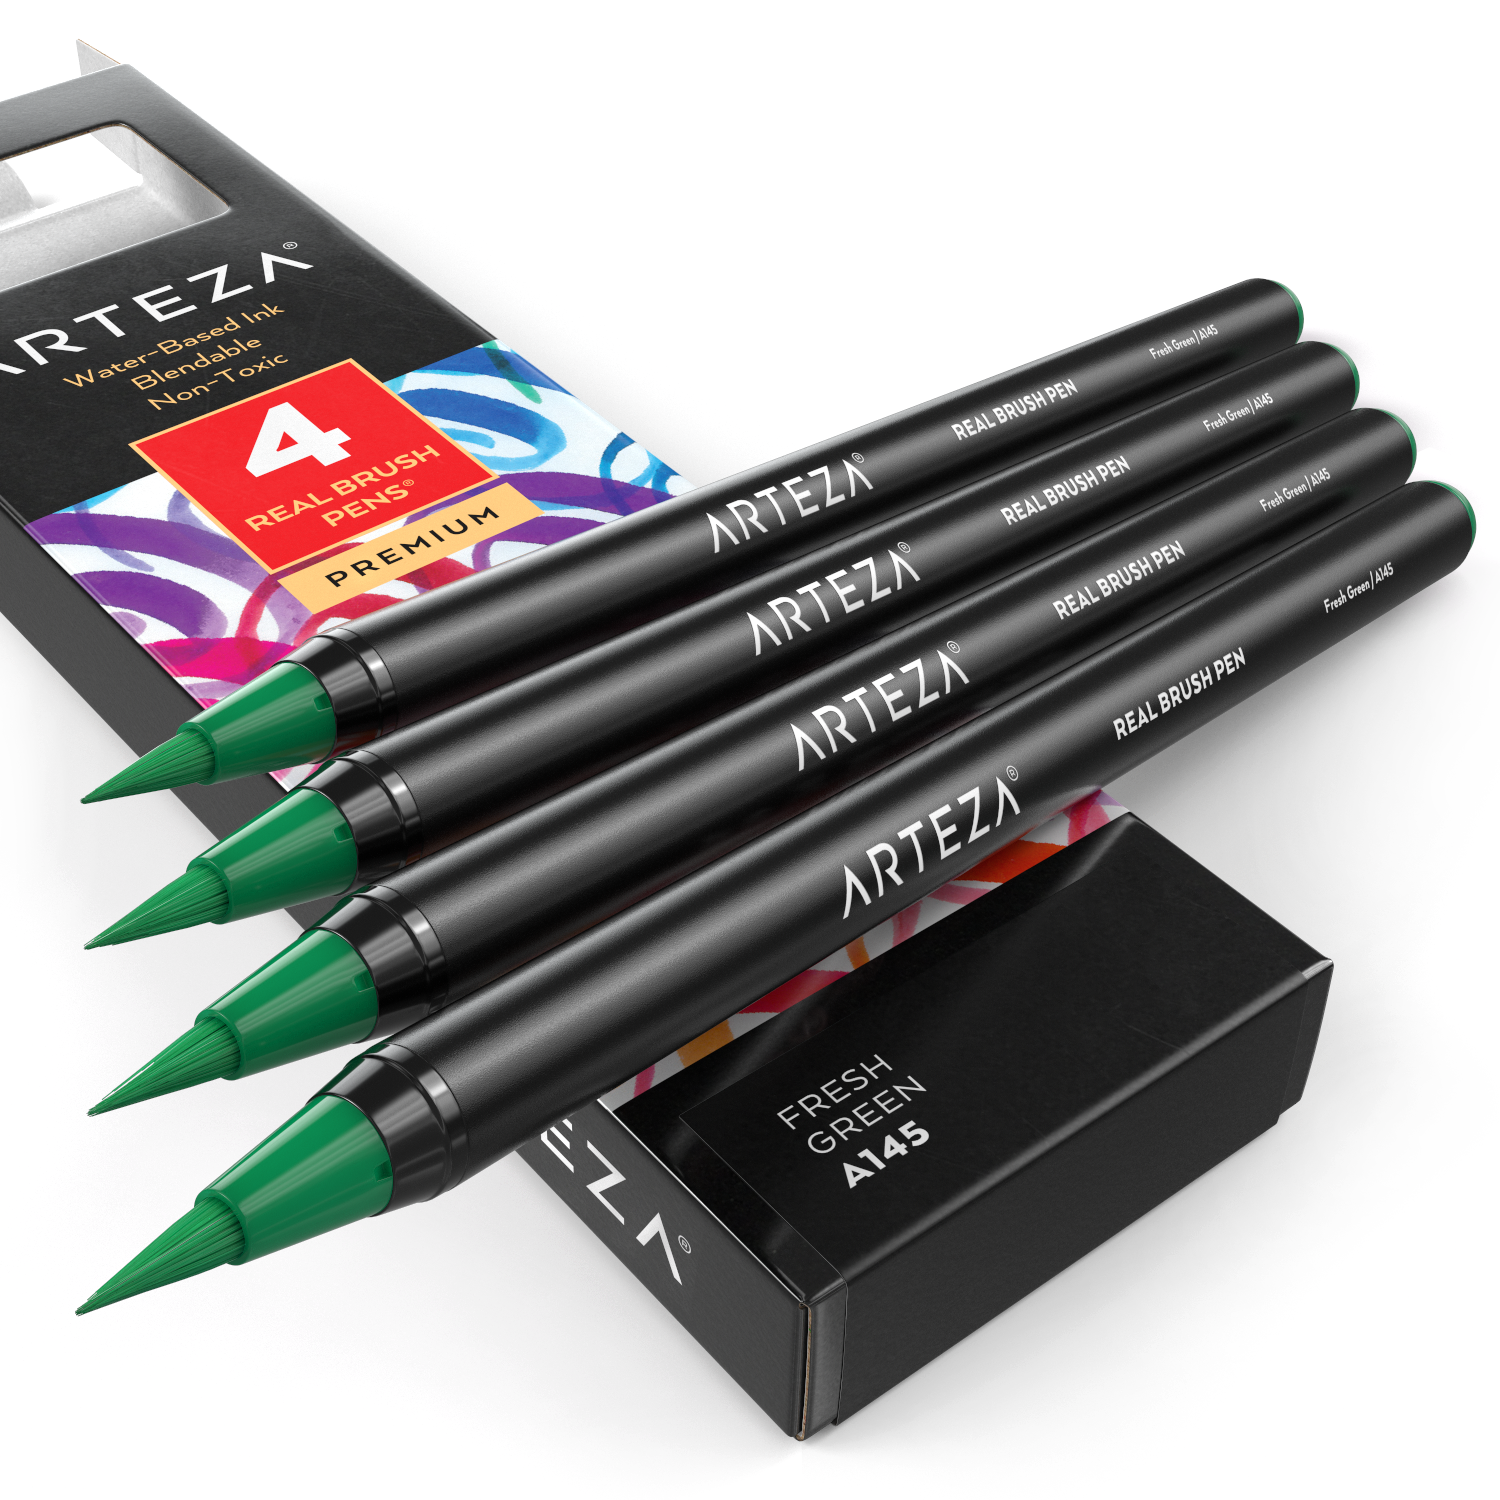 Arteza Real Brush Pens (A135 Cantaloupe) Pack of 4, for Watercolor Painting with Flexible Nylon Brush Tips, Paint Markers for Coloring, Calligraphy